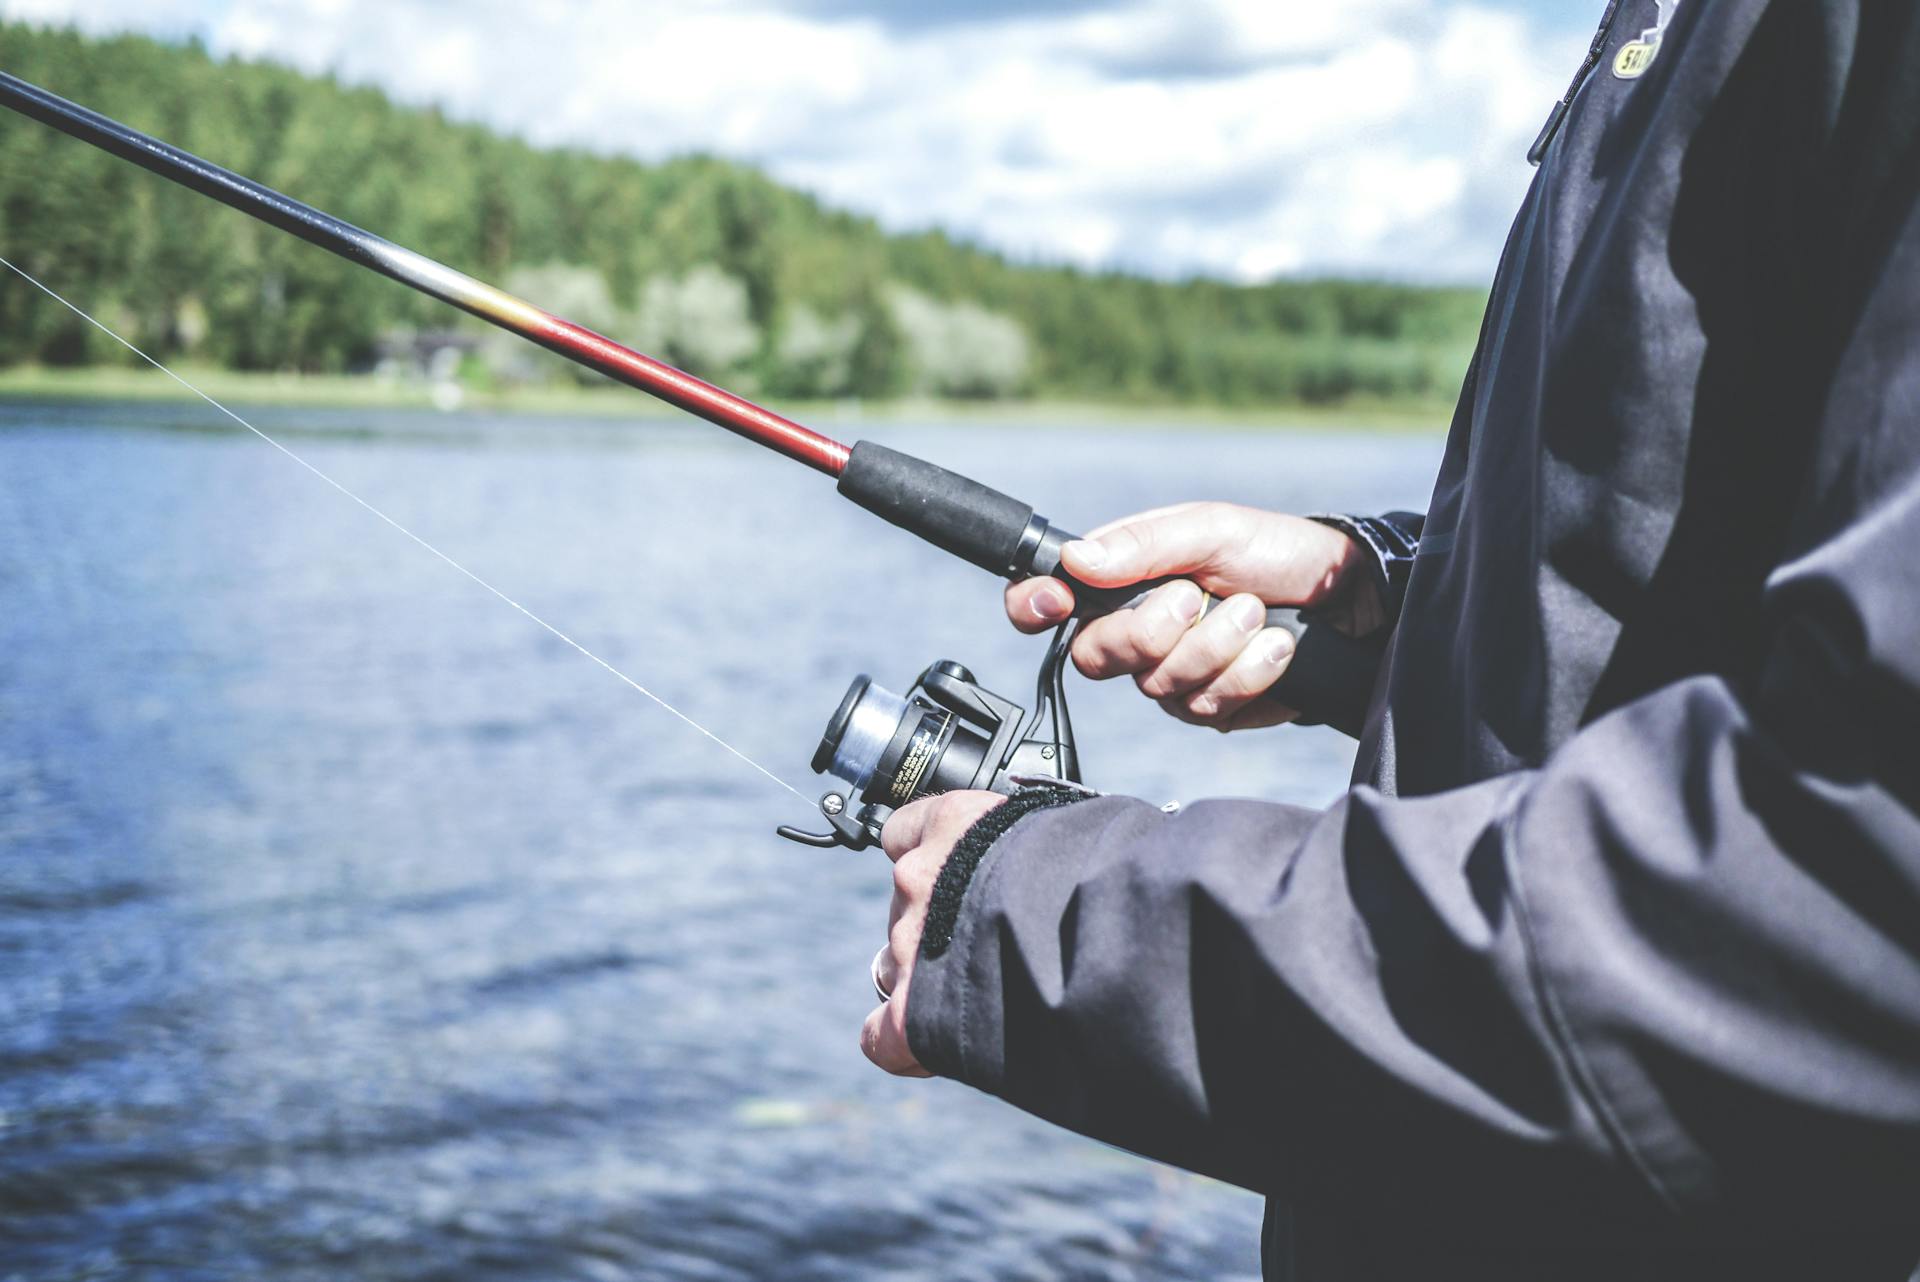 A person fishing | Source: Pexels